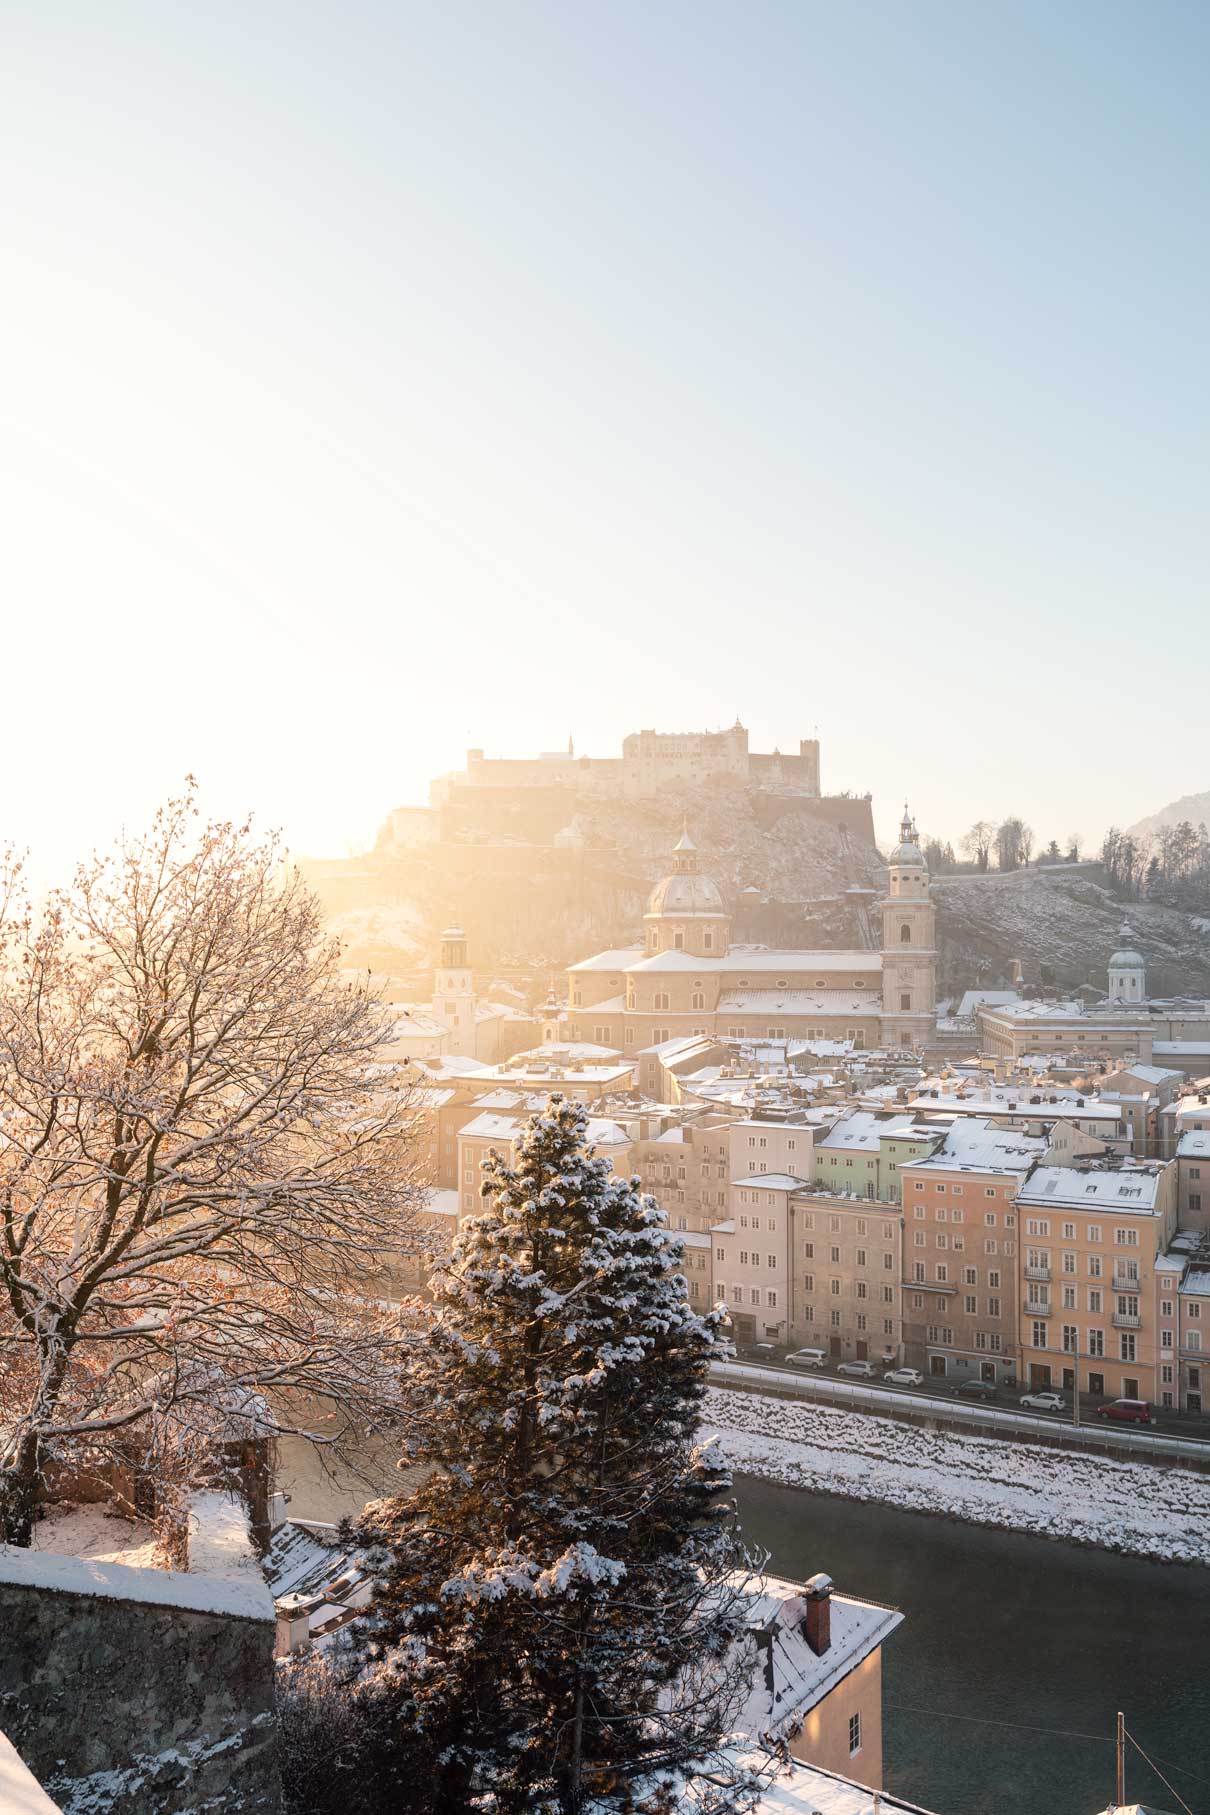 2 Days in Salzburg: Christmas Markets and the most popular attractions